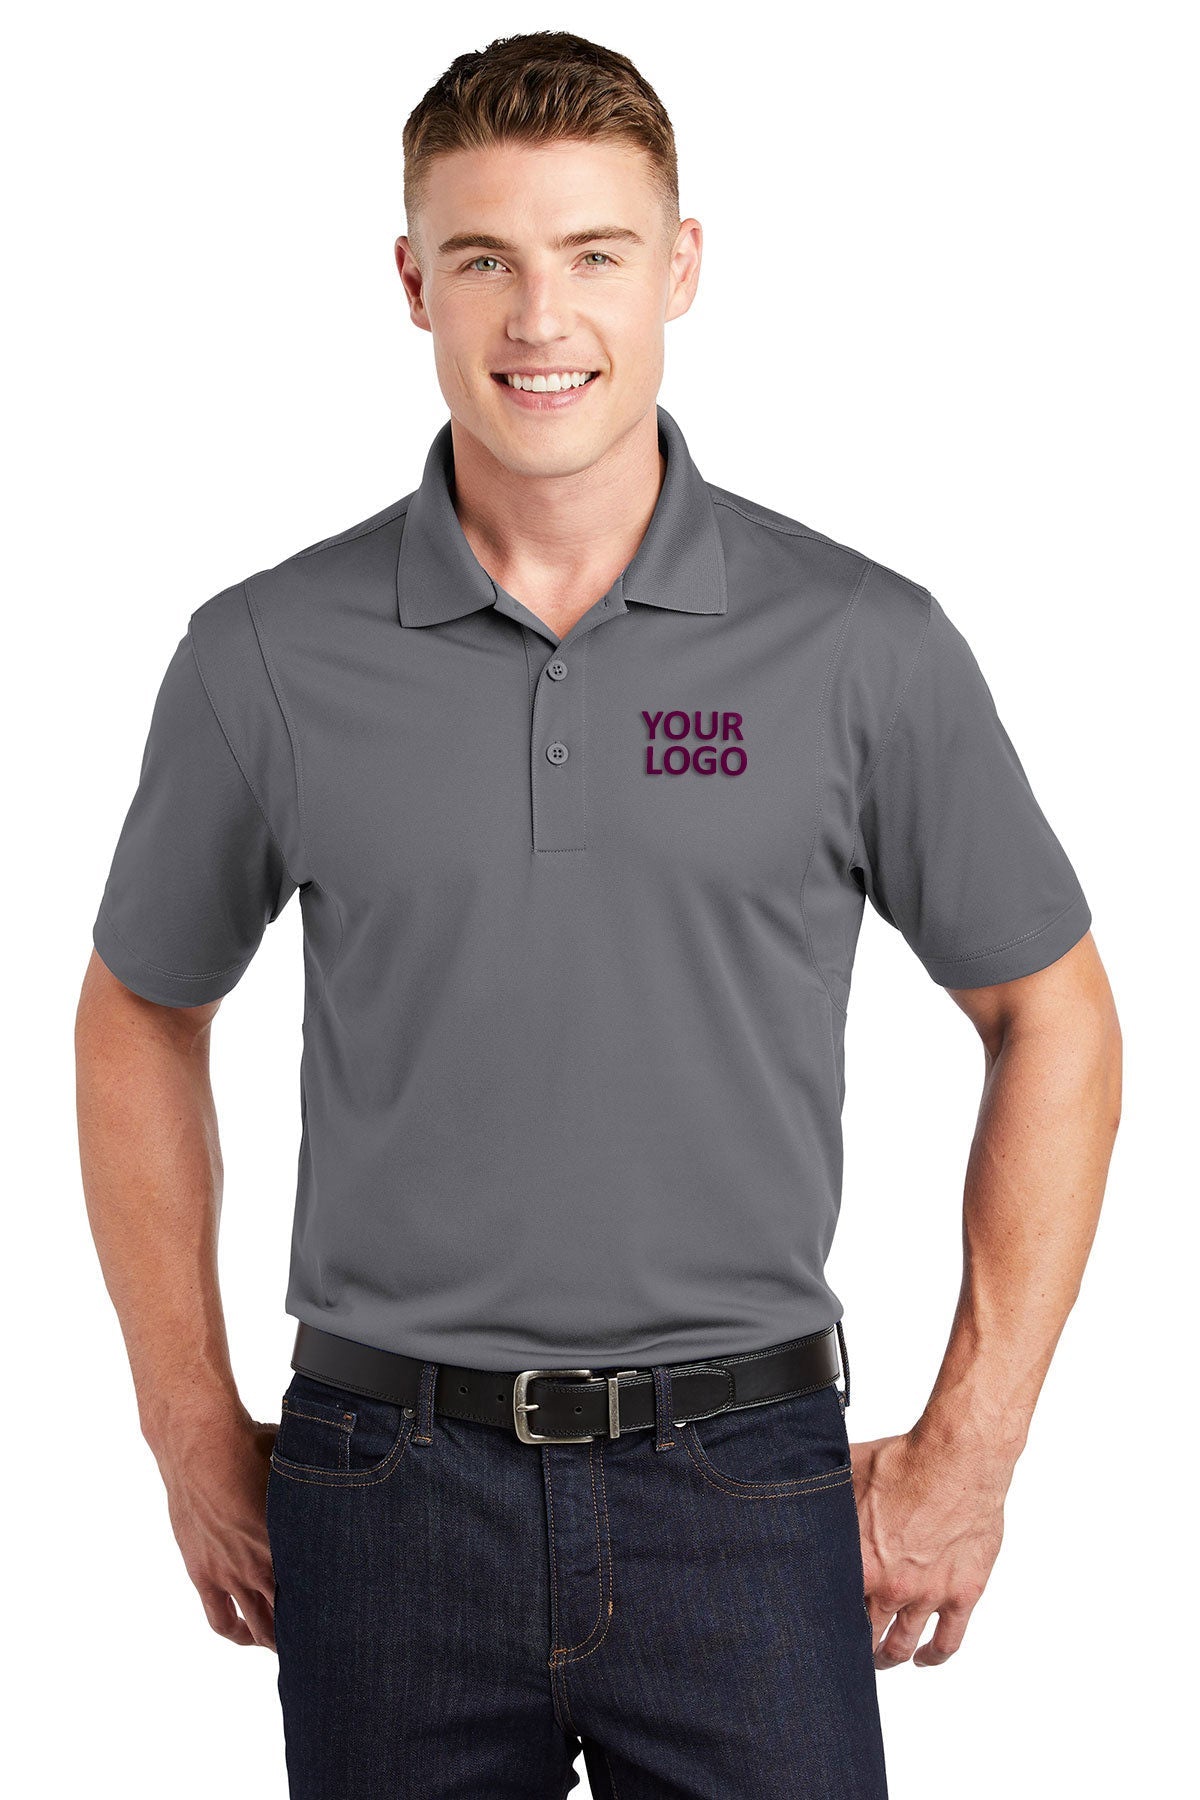 Sport-Tek Grey Concrete TST650 business polo shirts embroidered